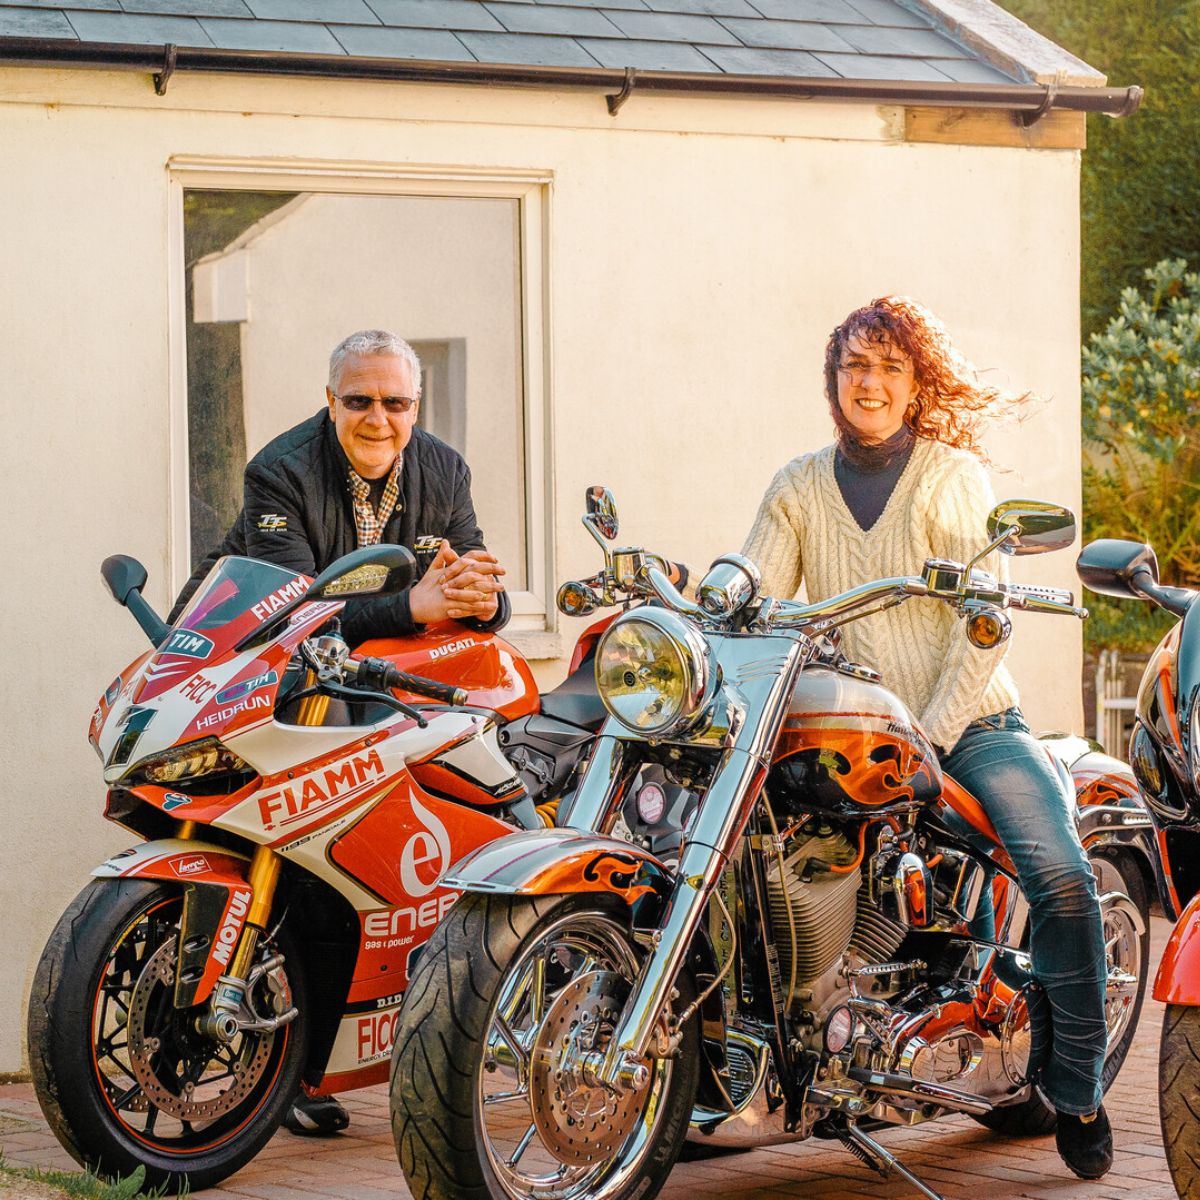 🏍 Up next for our TT relocation stories are David and Shelagh. After many years of travelling and living abroad, garment designers David, and Shelagh Commons, decided to lay roots in the Isle of Man!

Read David and Shelagh's story here: ow.ly/fRWl50Jkmrm